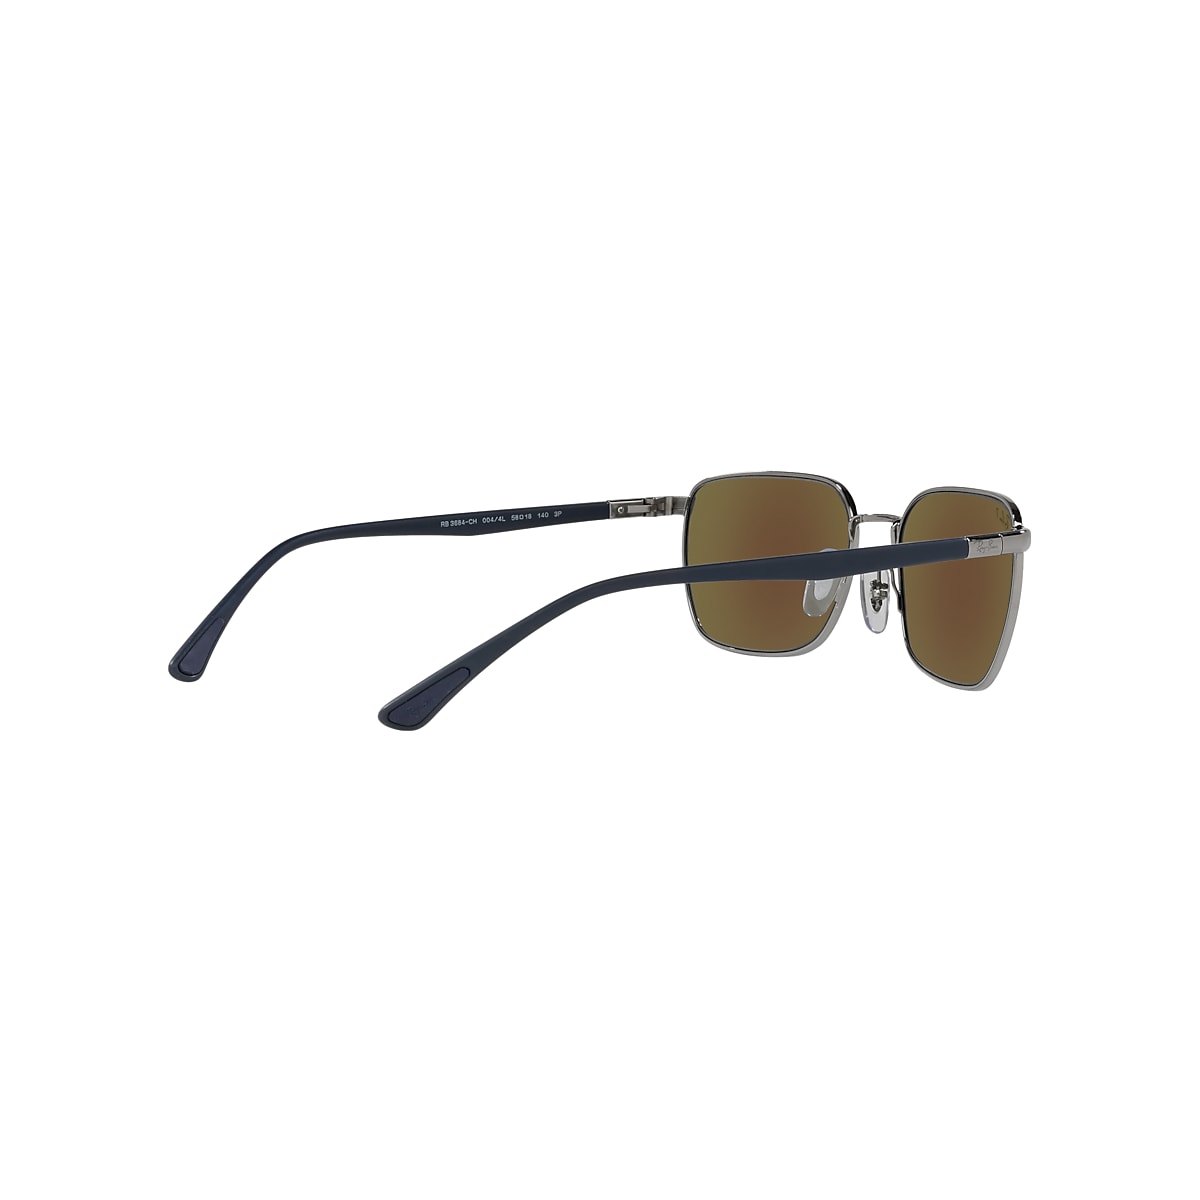 RB3684CH CHROMANCE Sunglasses in Gunmetal and Blue - RB3684CH 